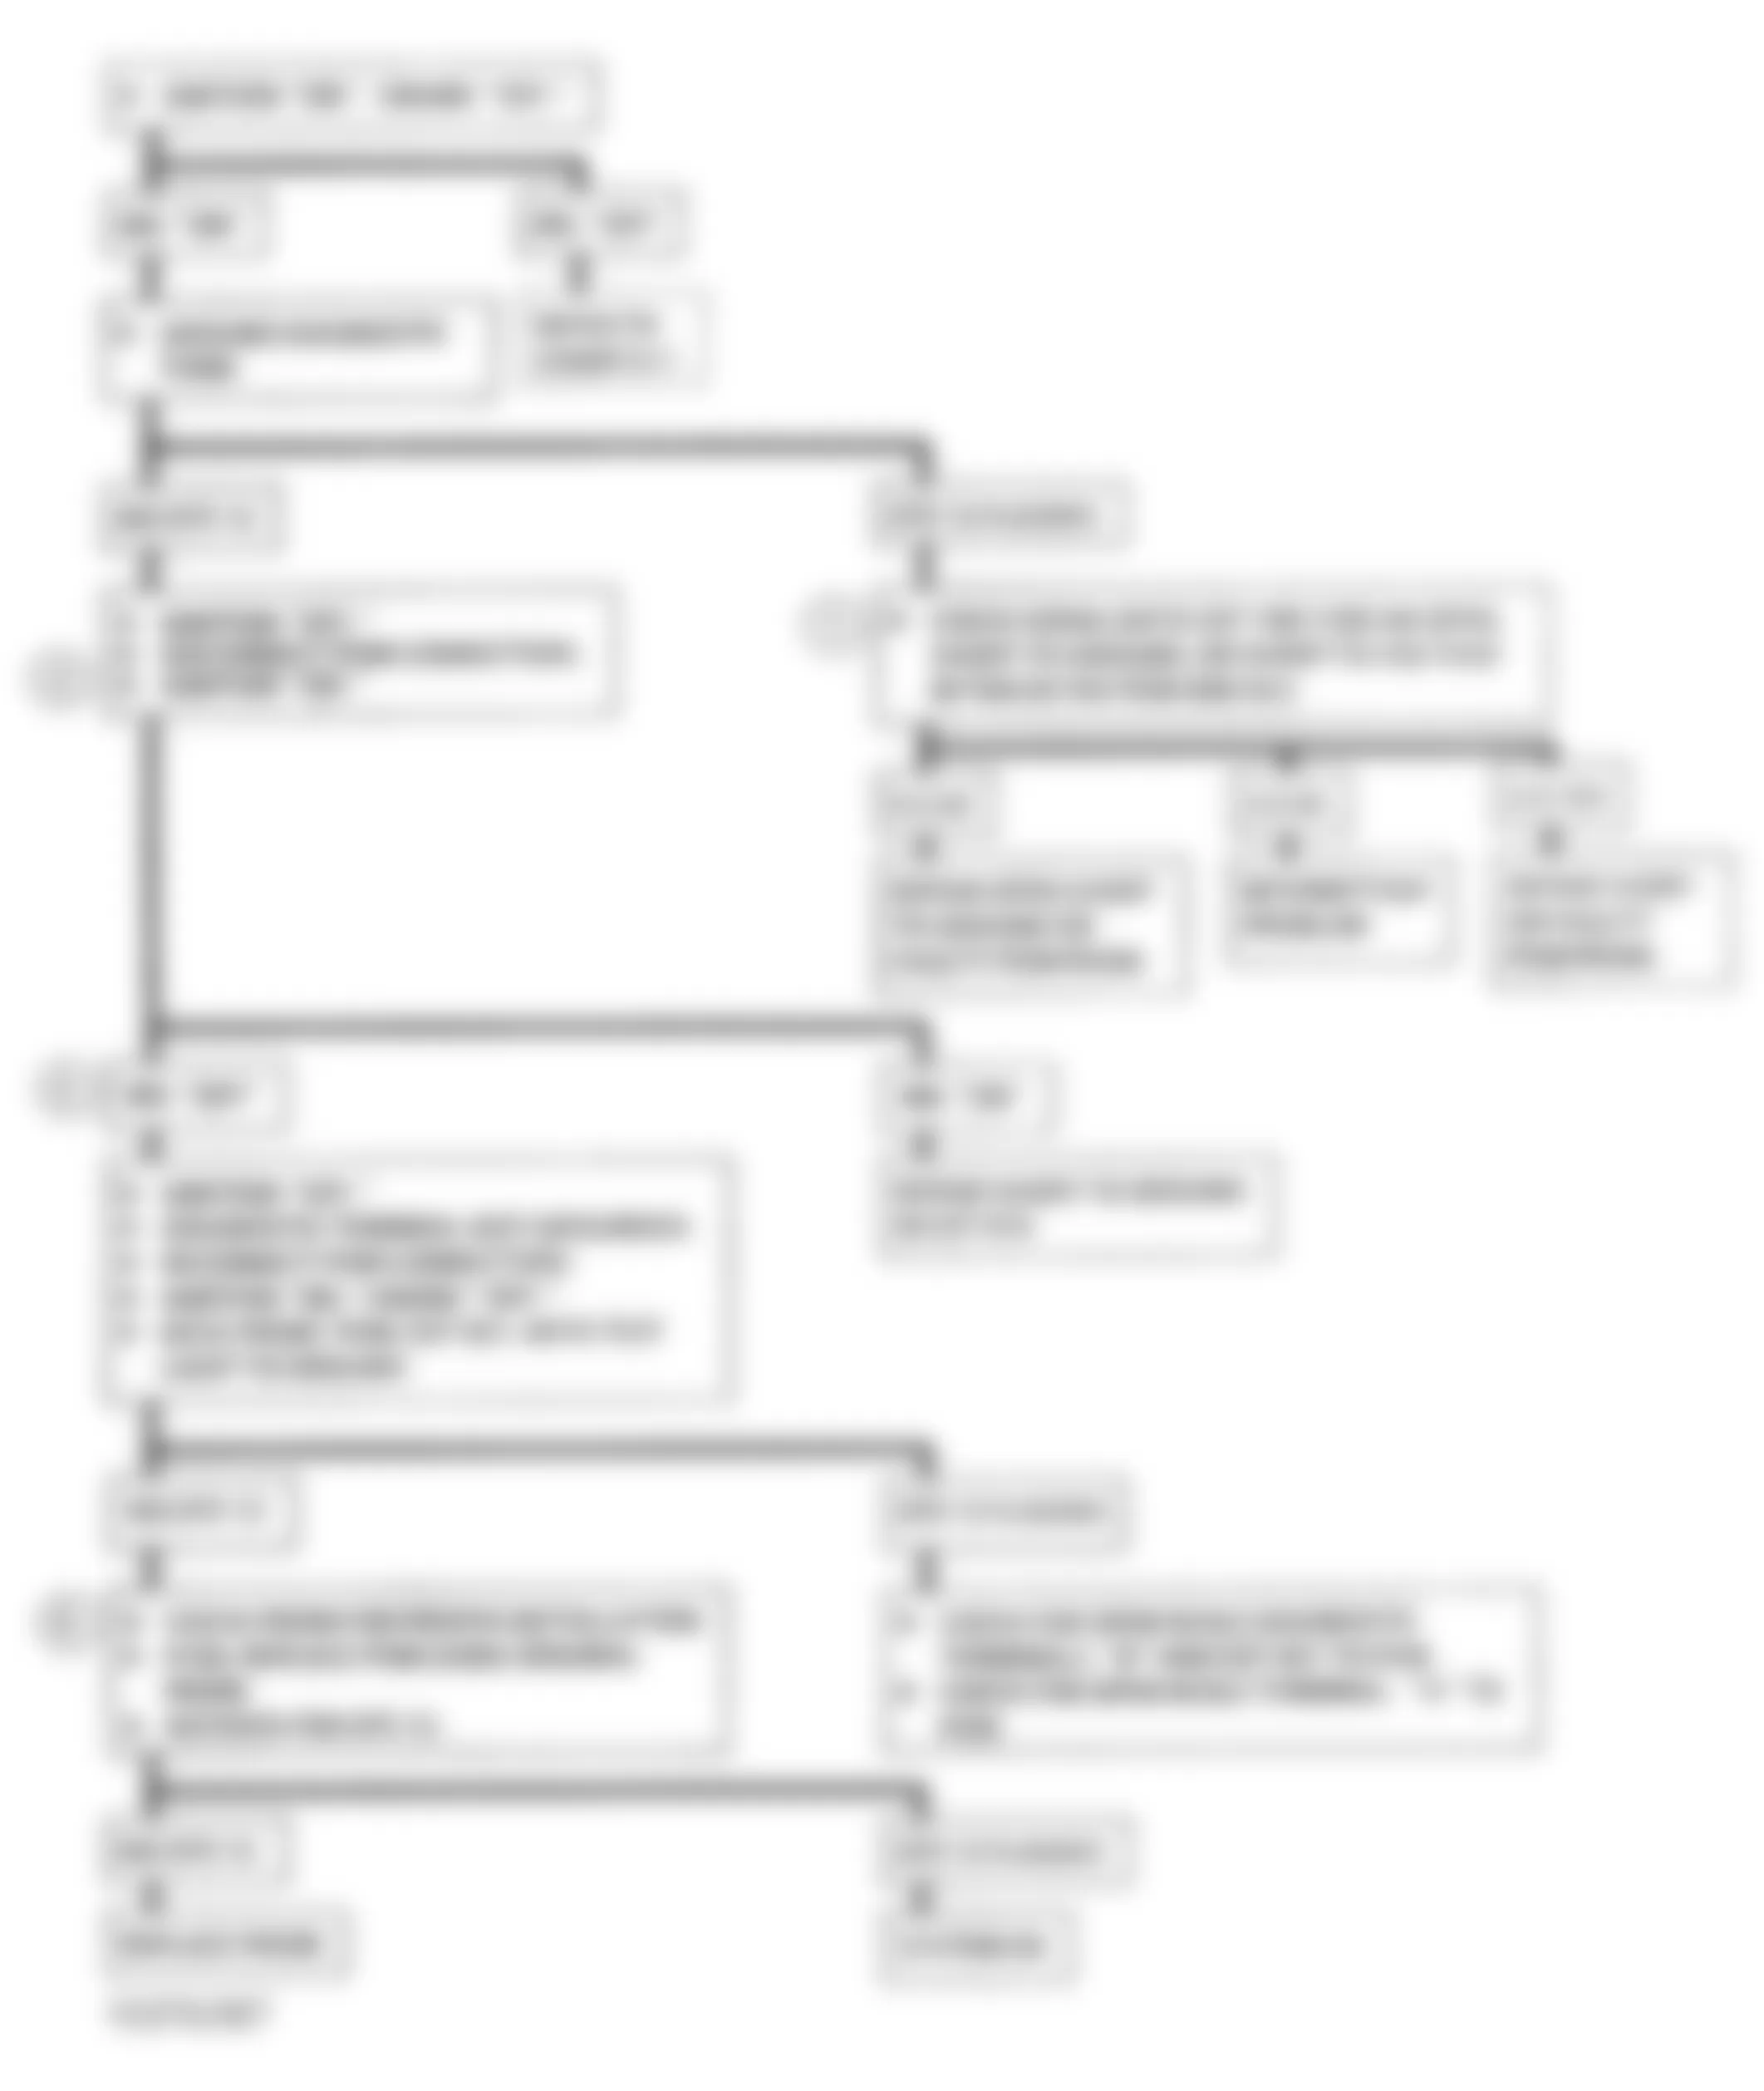 GMC Suburban C2500 1993 - Component Locations -  A-2, Flowchart, No DLC Data, MIL On All Time - A/T